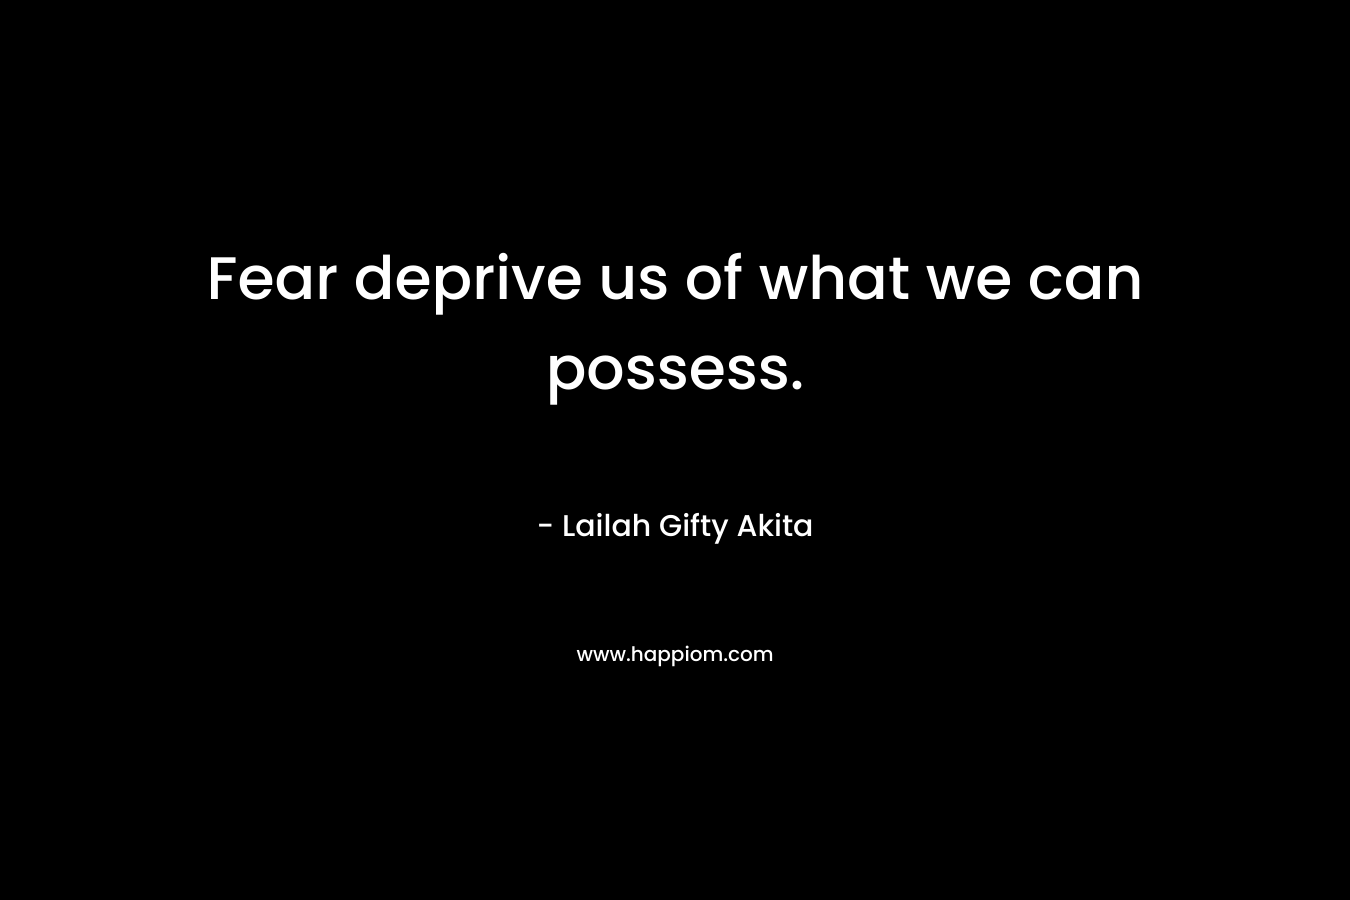 Fear deprive us of what we can possess.